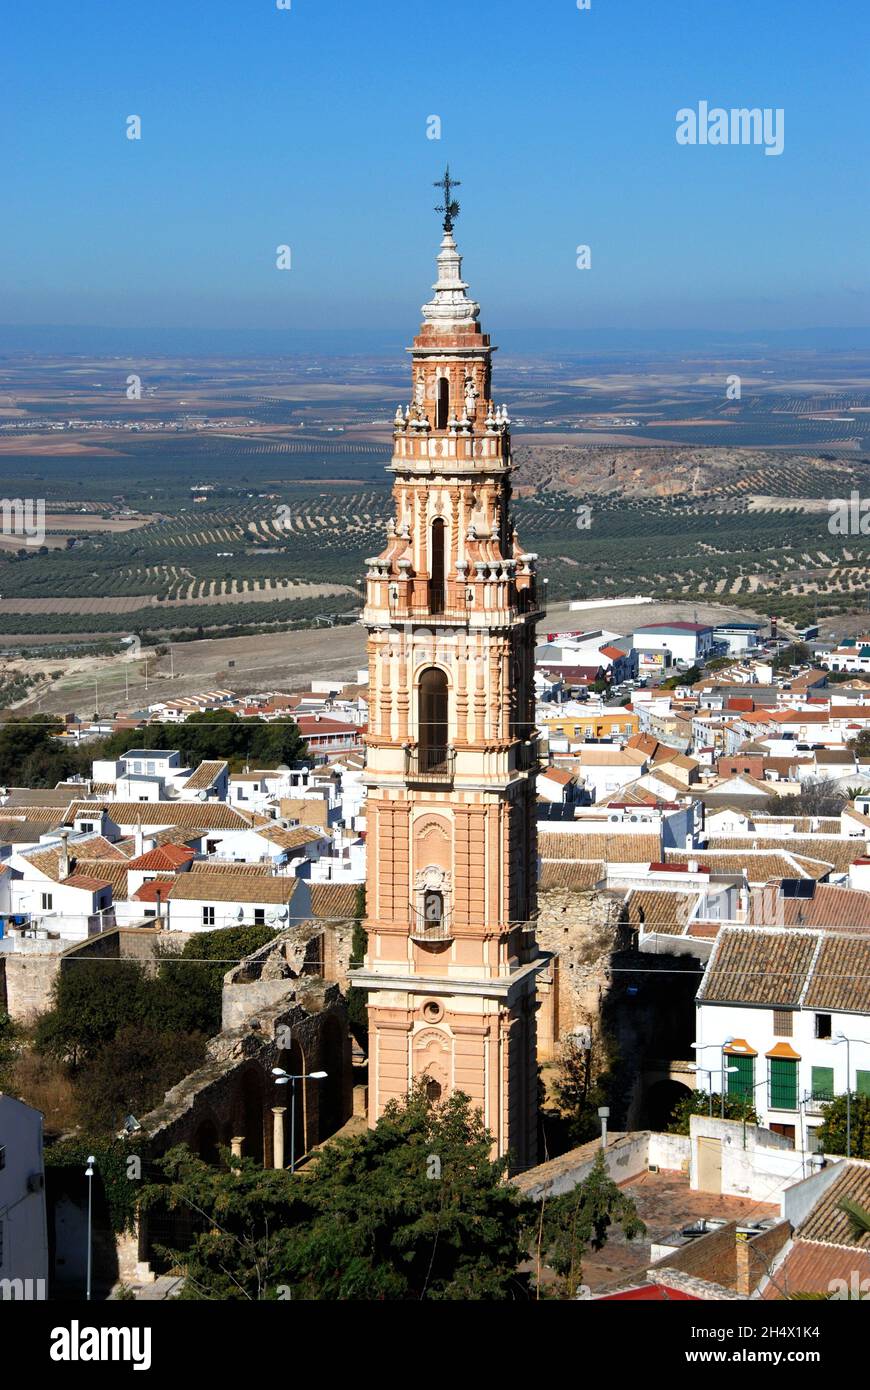 Victoria tower (Torre de la Victoria) with views over rooftops towards the countryside, Estepa, Spain. Stock Photo